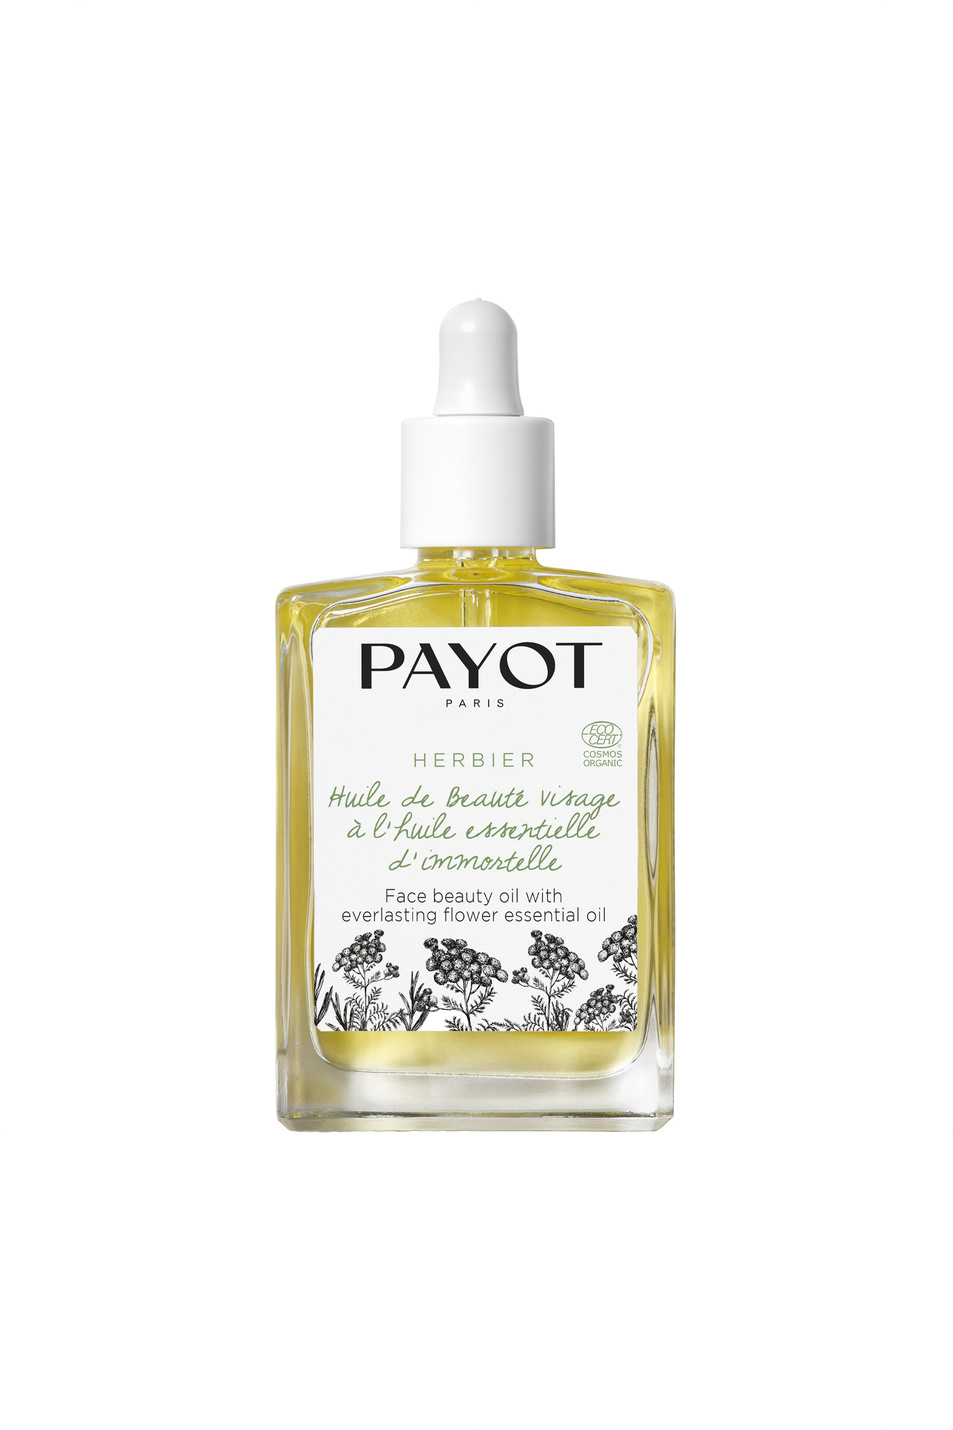 PAYOT Масло для лица HERBIER Face beauty oil with everlasting flower essential oil, 30 мл (цвет ), артикул 65117908 | Фото 1